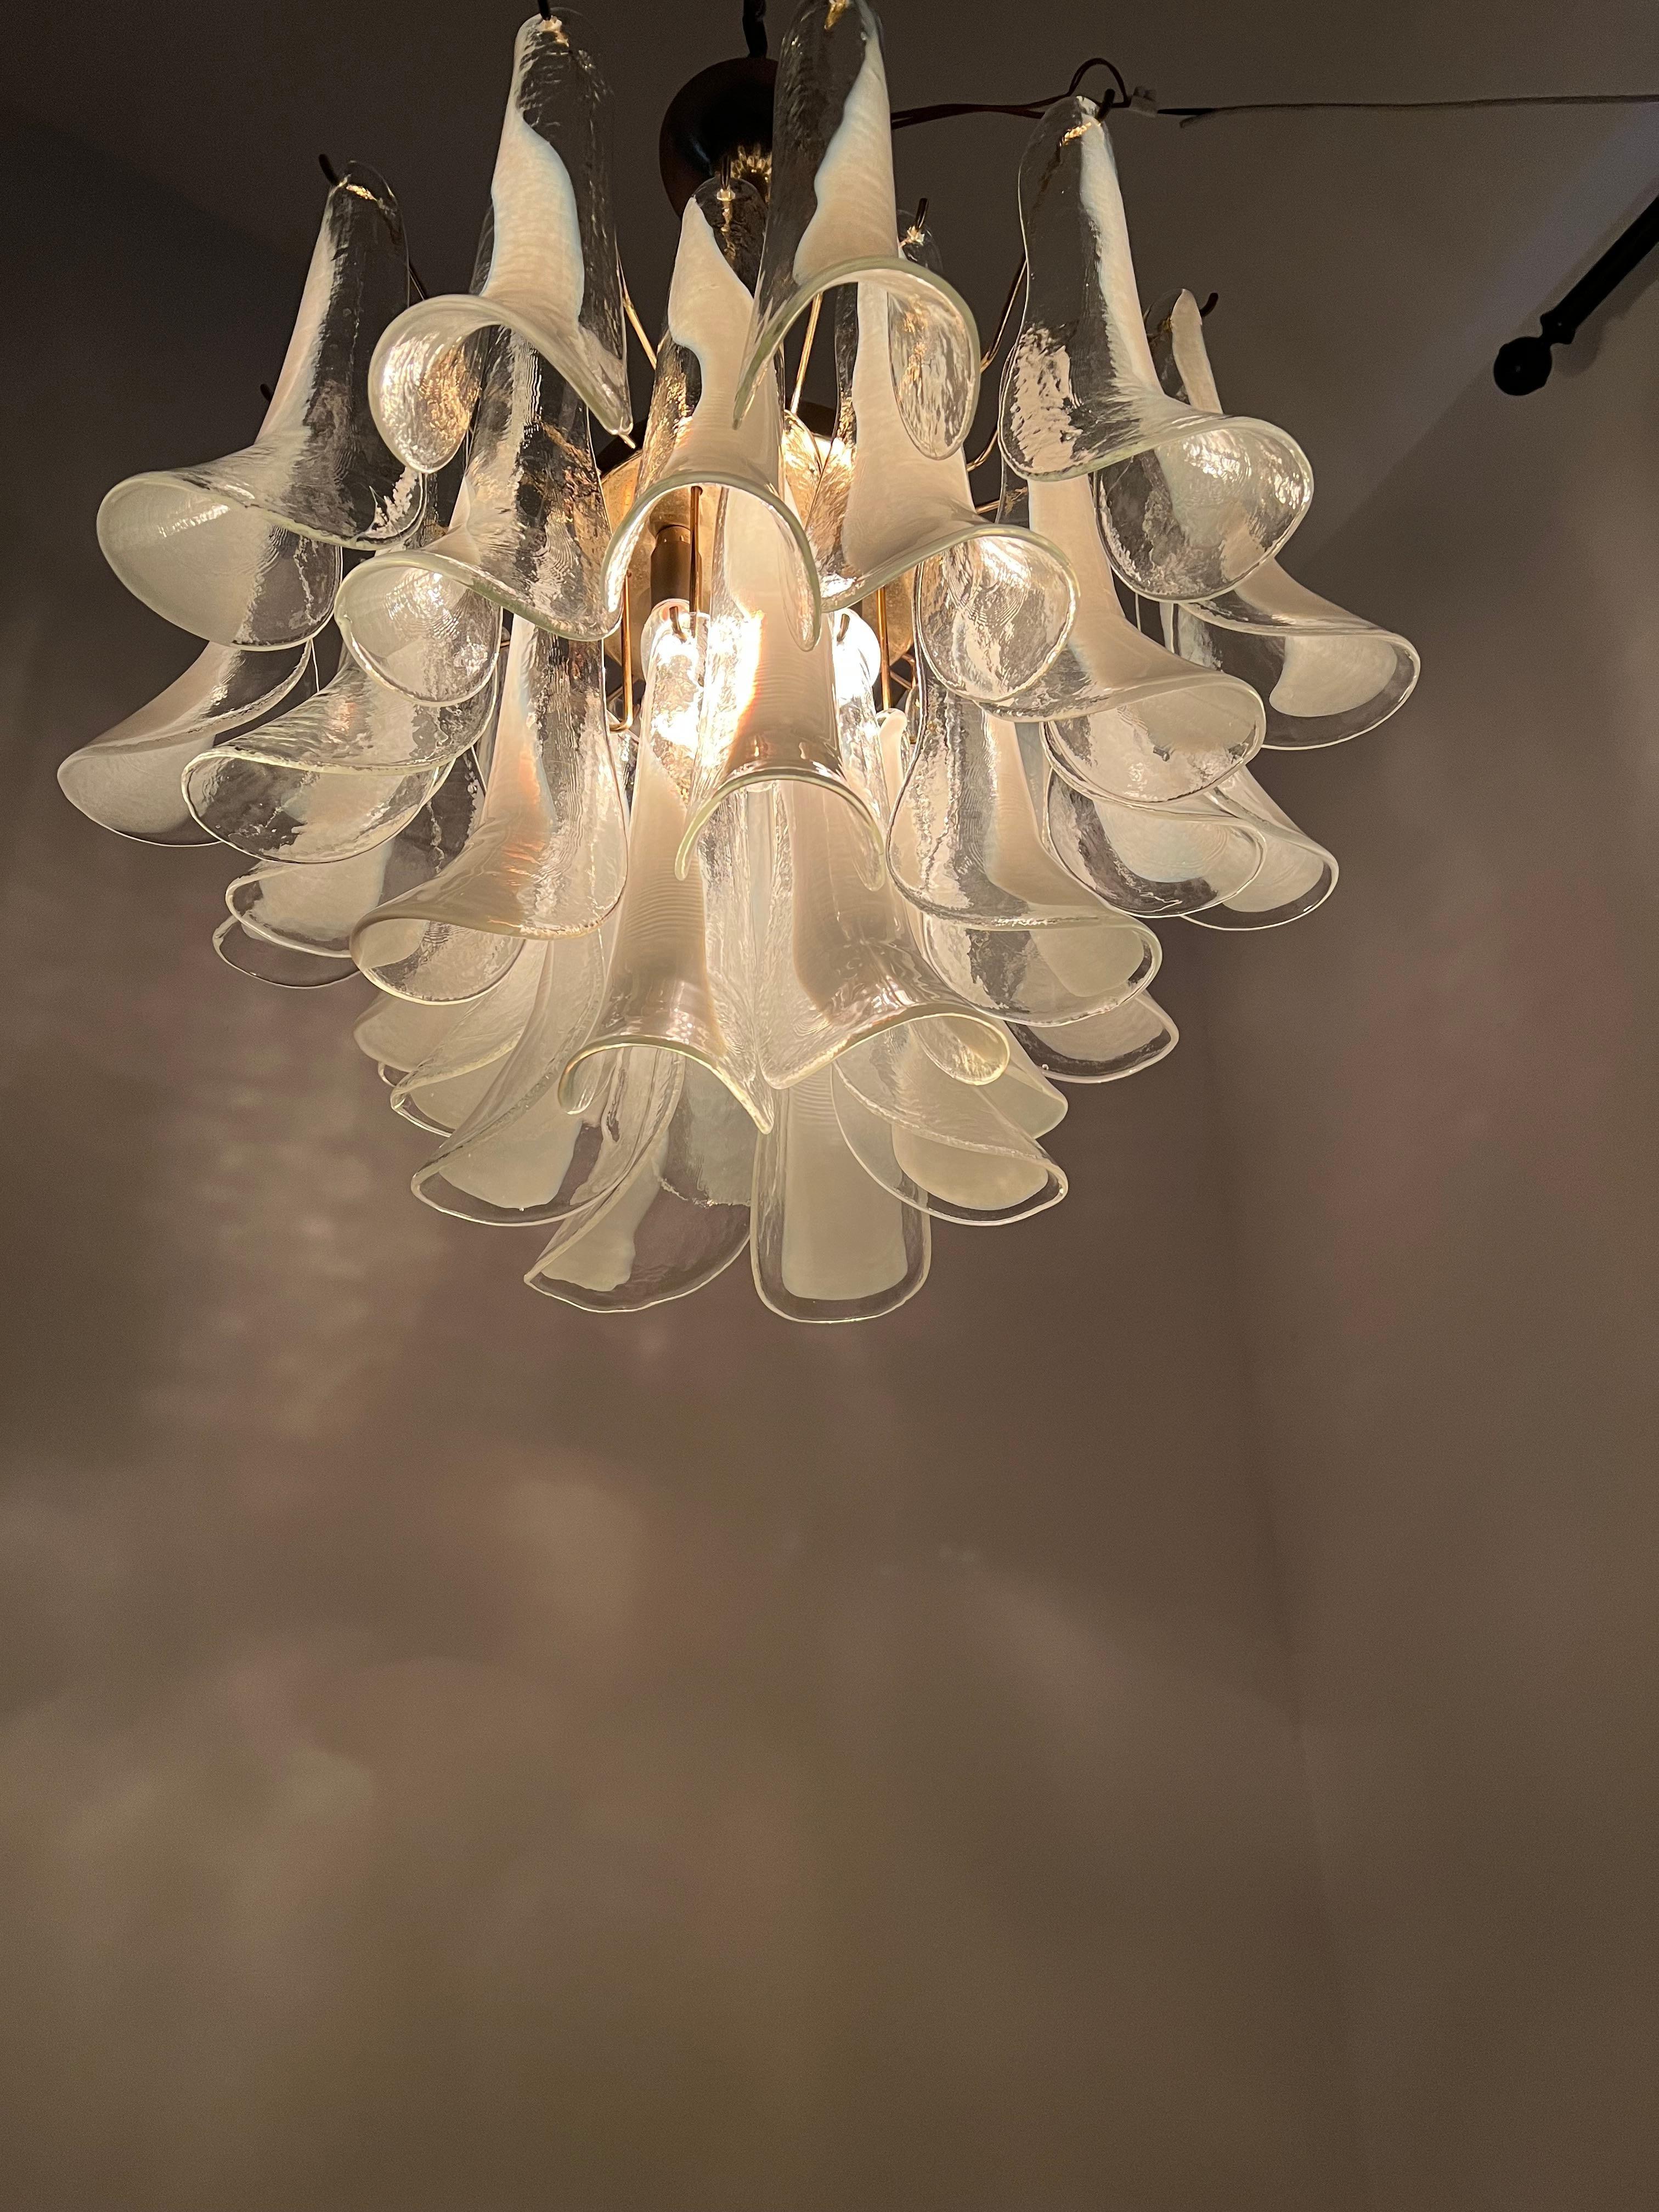 Two Identical Signed Mid-Century Modern Chandeliers, La Murrina in Murano Glass For Sale 11